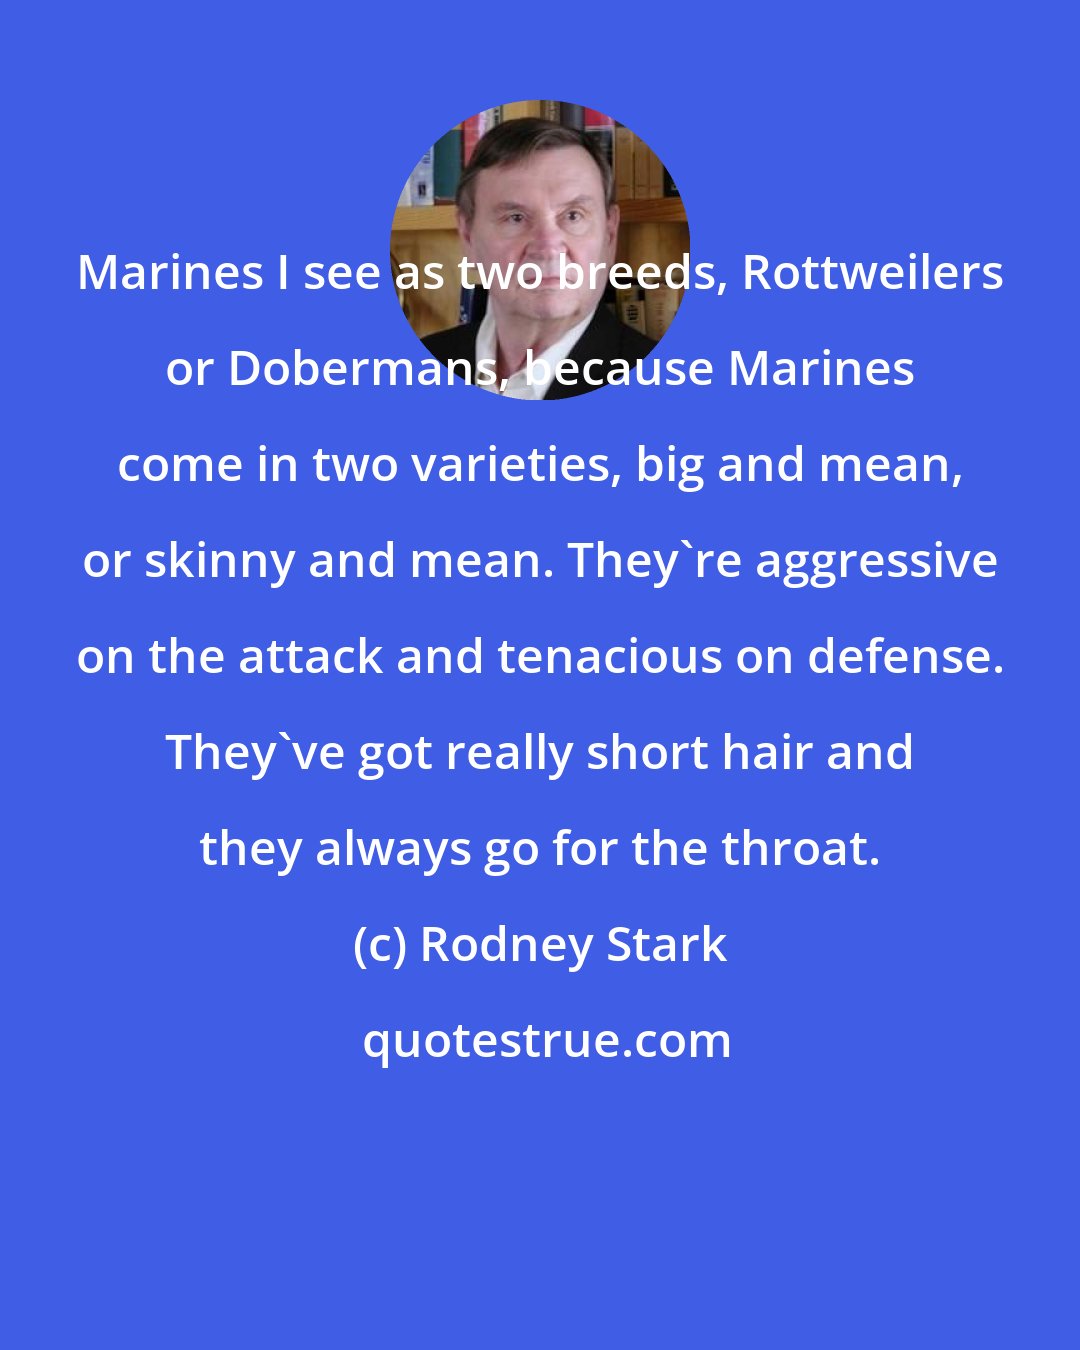 Rodney Stark: Marines I see as two breeds, Rottweilers or Dobermans, because Marines come in two varieties, big and mean, or skinny and mean. They're aggressive on the attack and tenacious on defense. They've got really short hair and they always go for the throat.